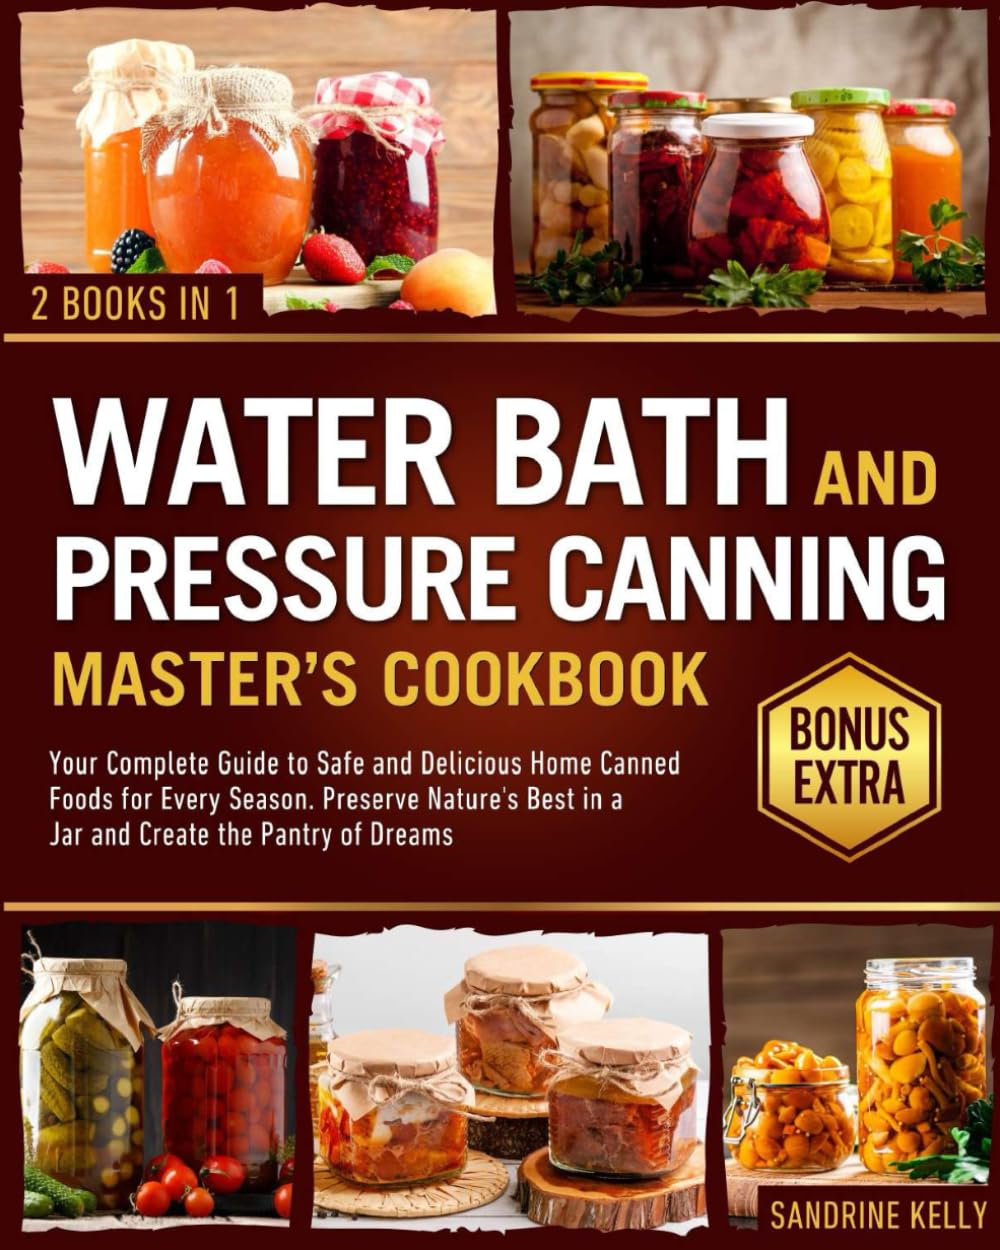 The Water Bath & Pressure Canning Master's Cookbook: Your Complete Guide to Safe and Delicious Home Canned Foods for Every Season. Preserve Nature's Best in a Jar and Create the Pantry of Dreams